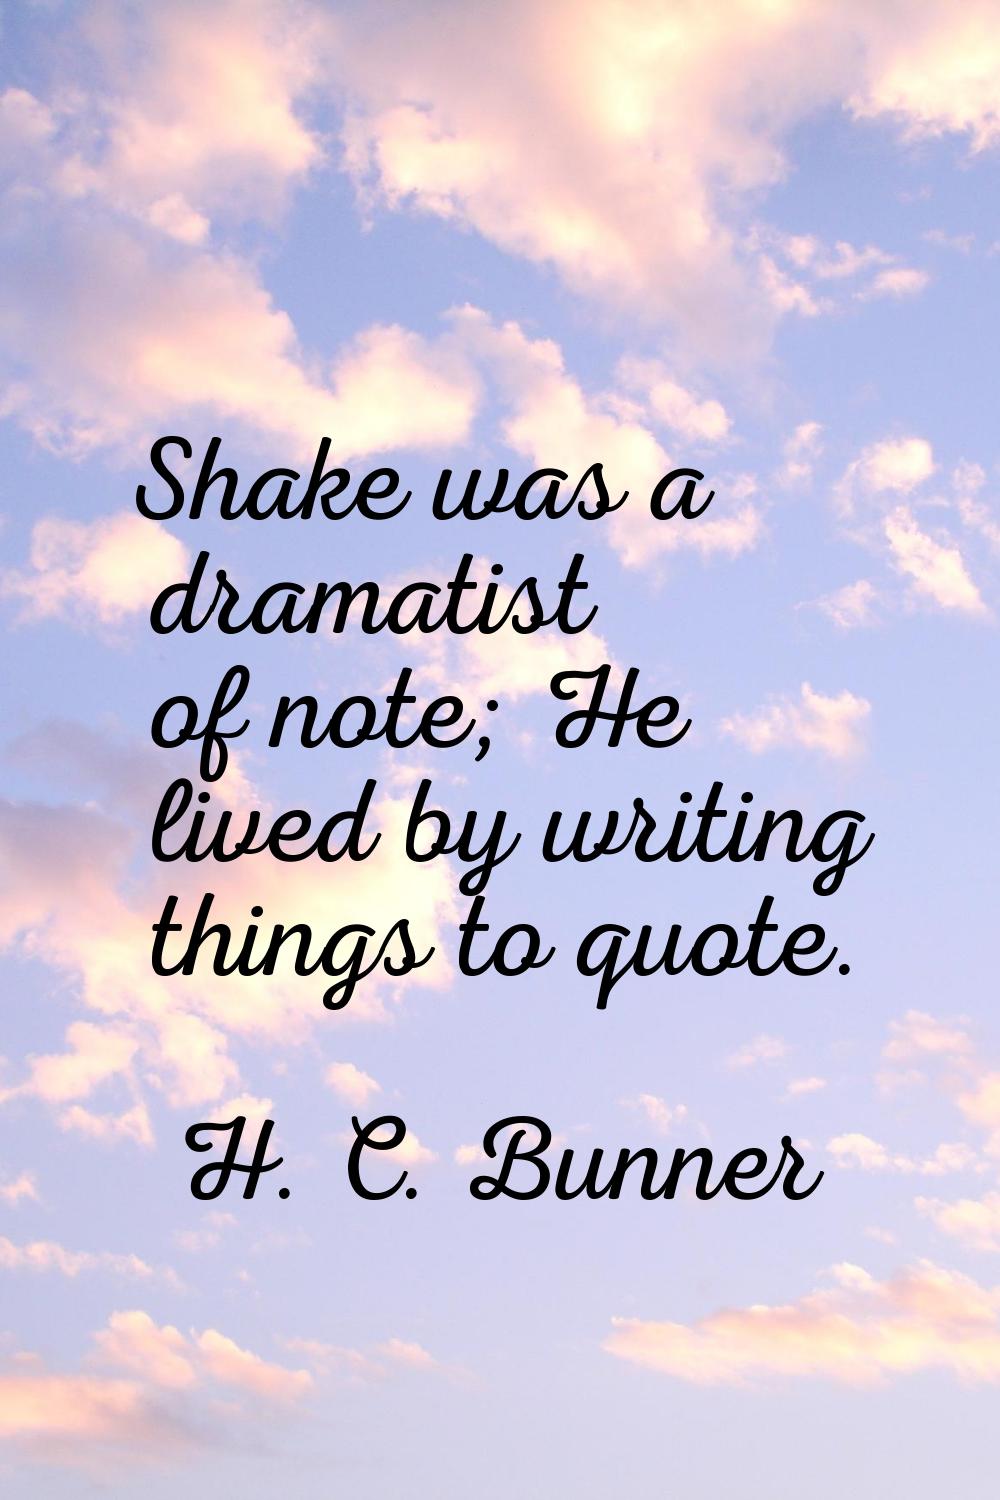 Shake was a dramatist of note; He lived by writing things to quote.